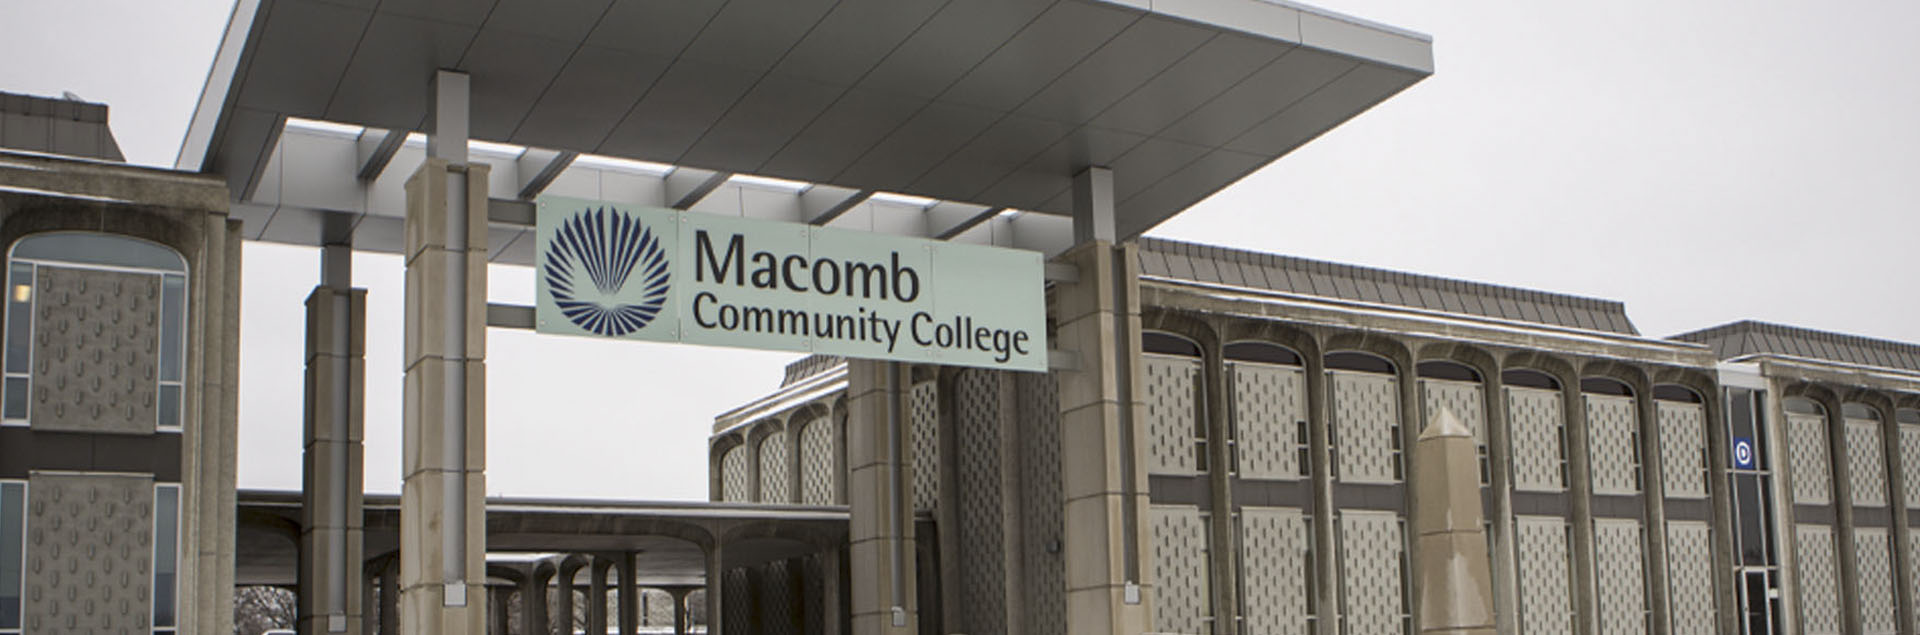 Macomb Community College South Campus Entrance